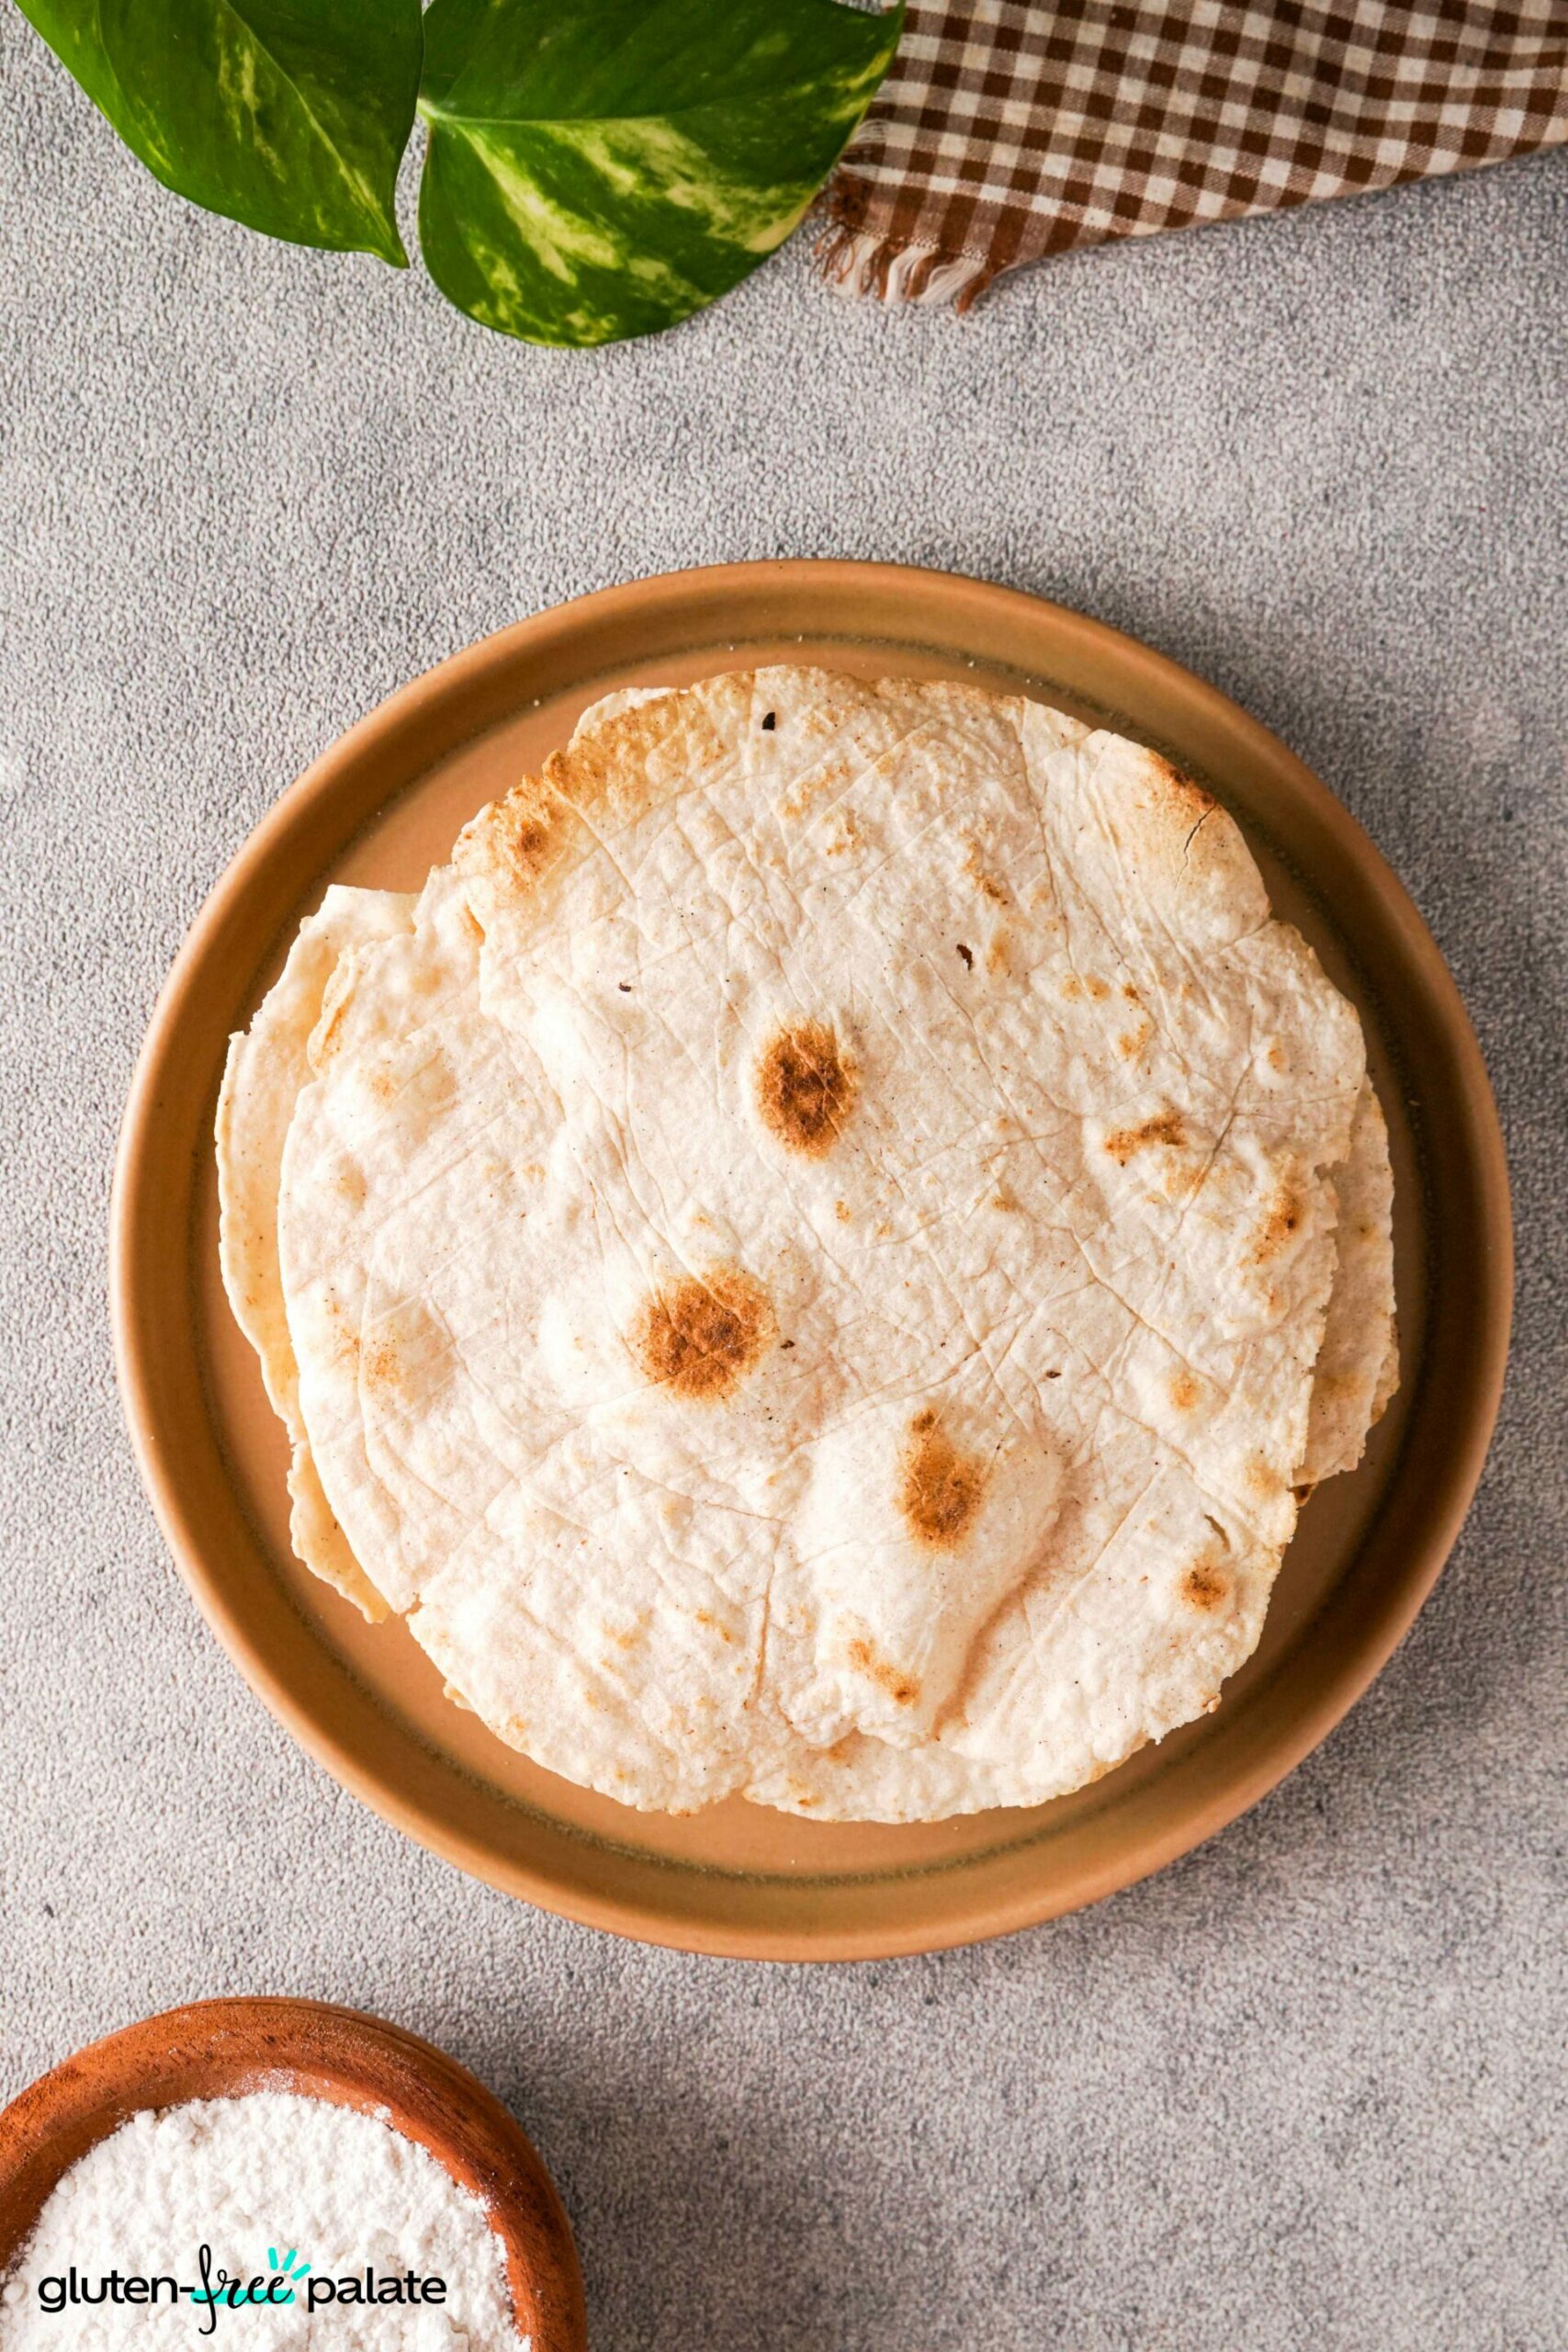 Stacked Gluten-Free Tortillas on a plate.